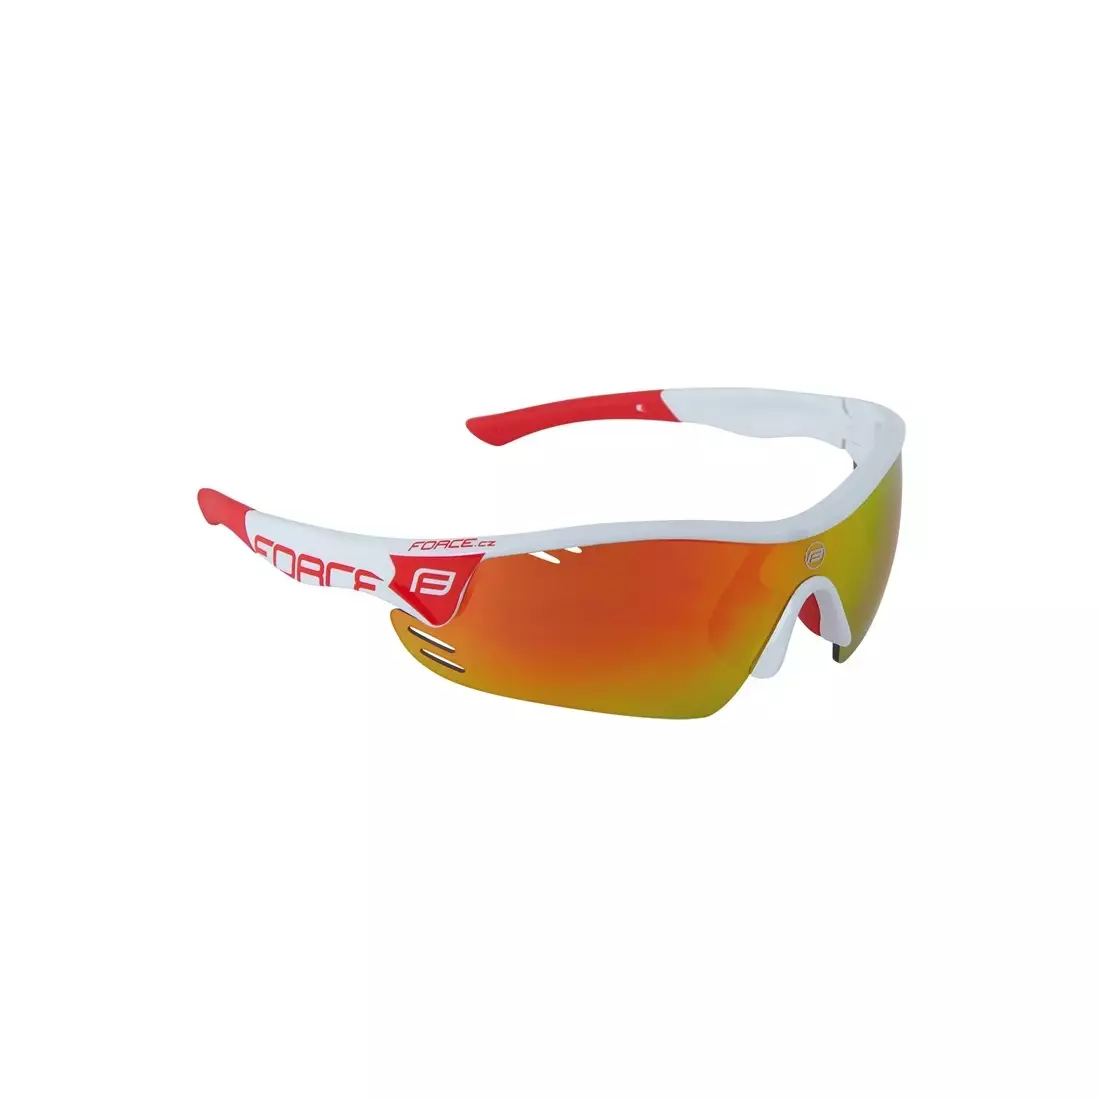 FORCE RACE PRO Brýle white/red 909392 